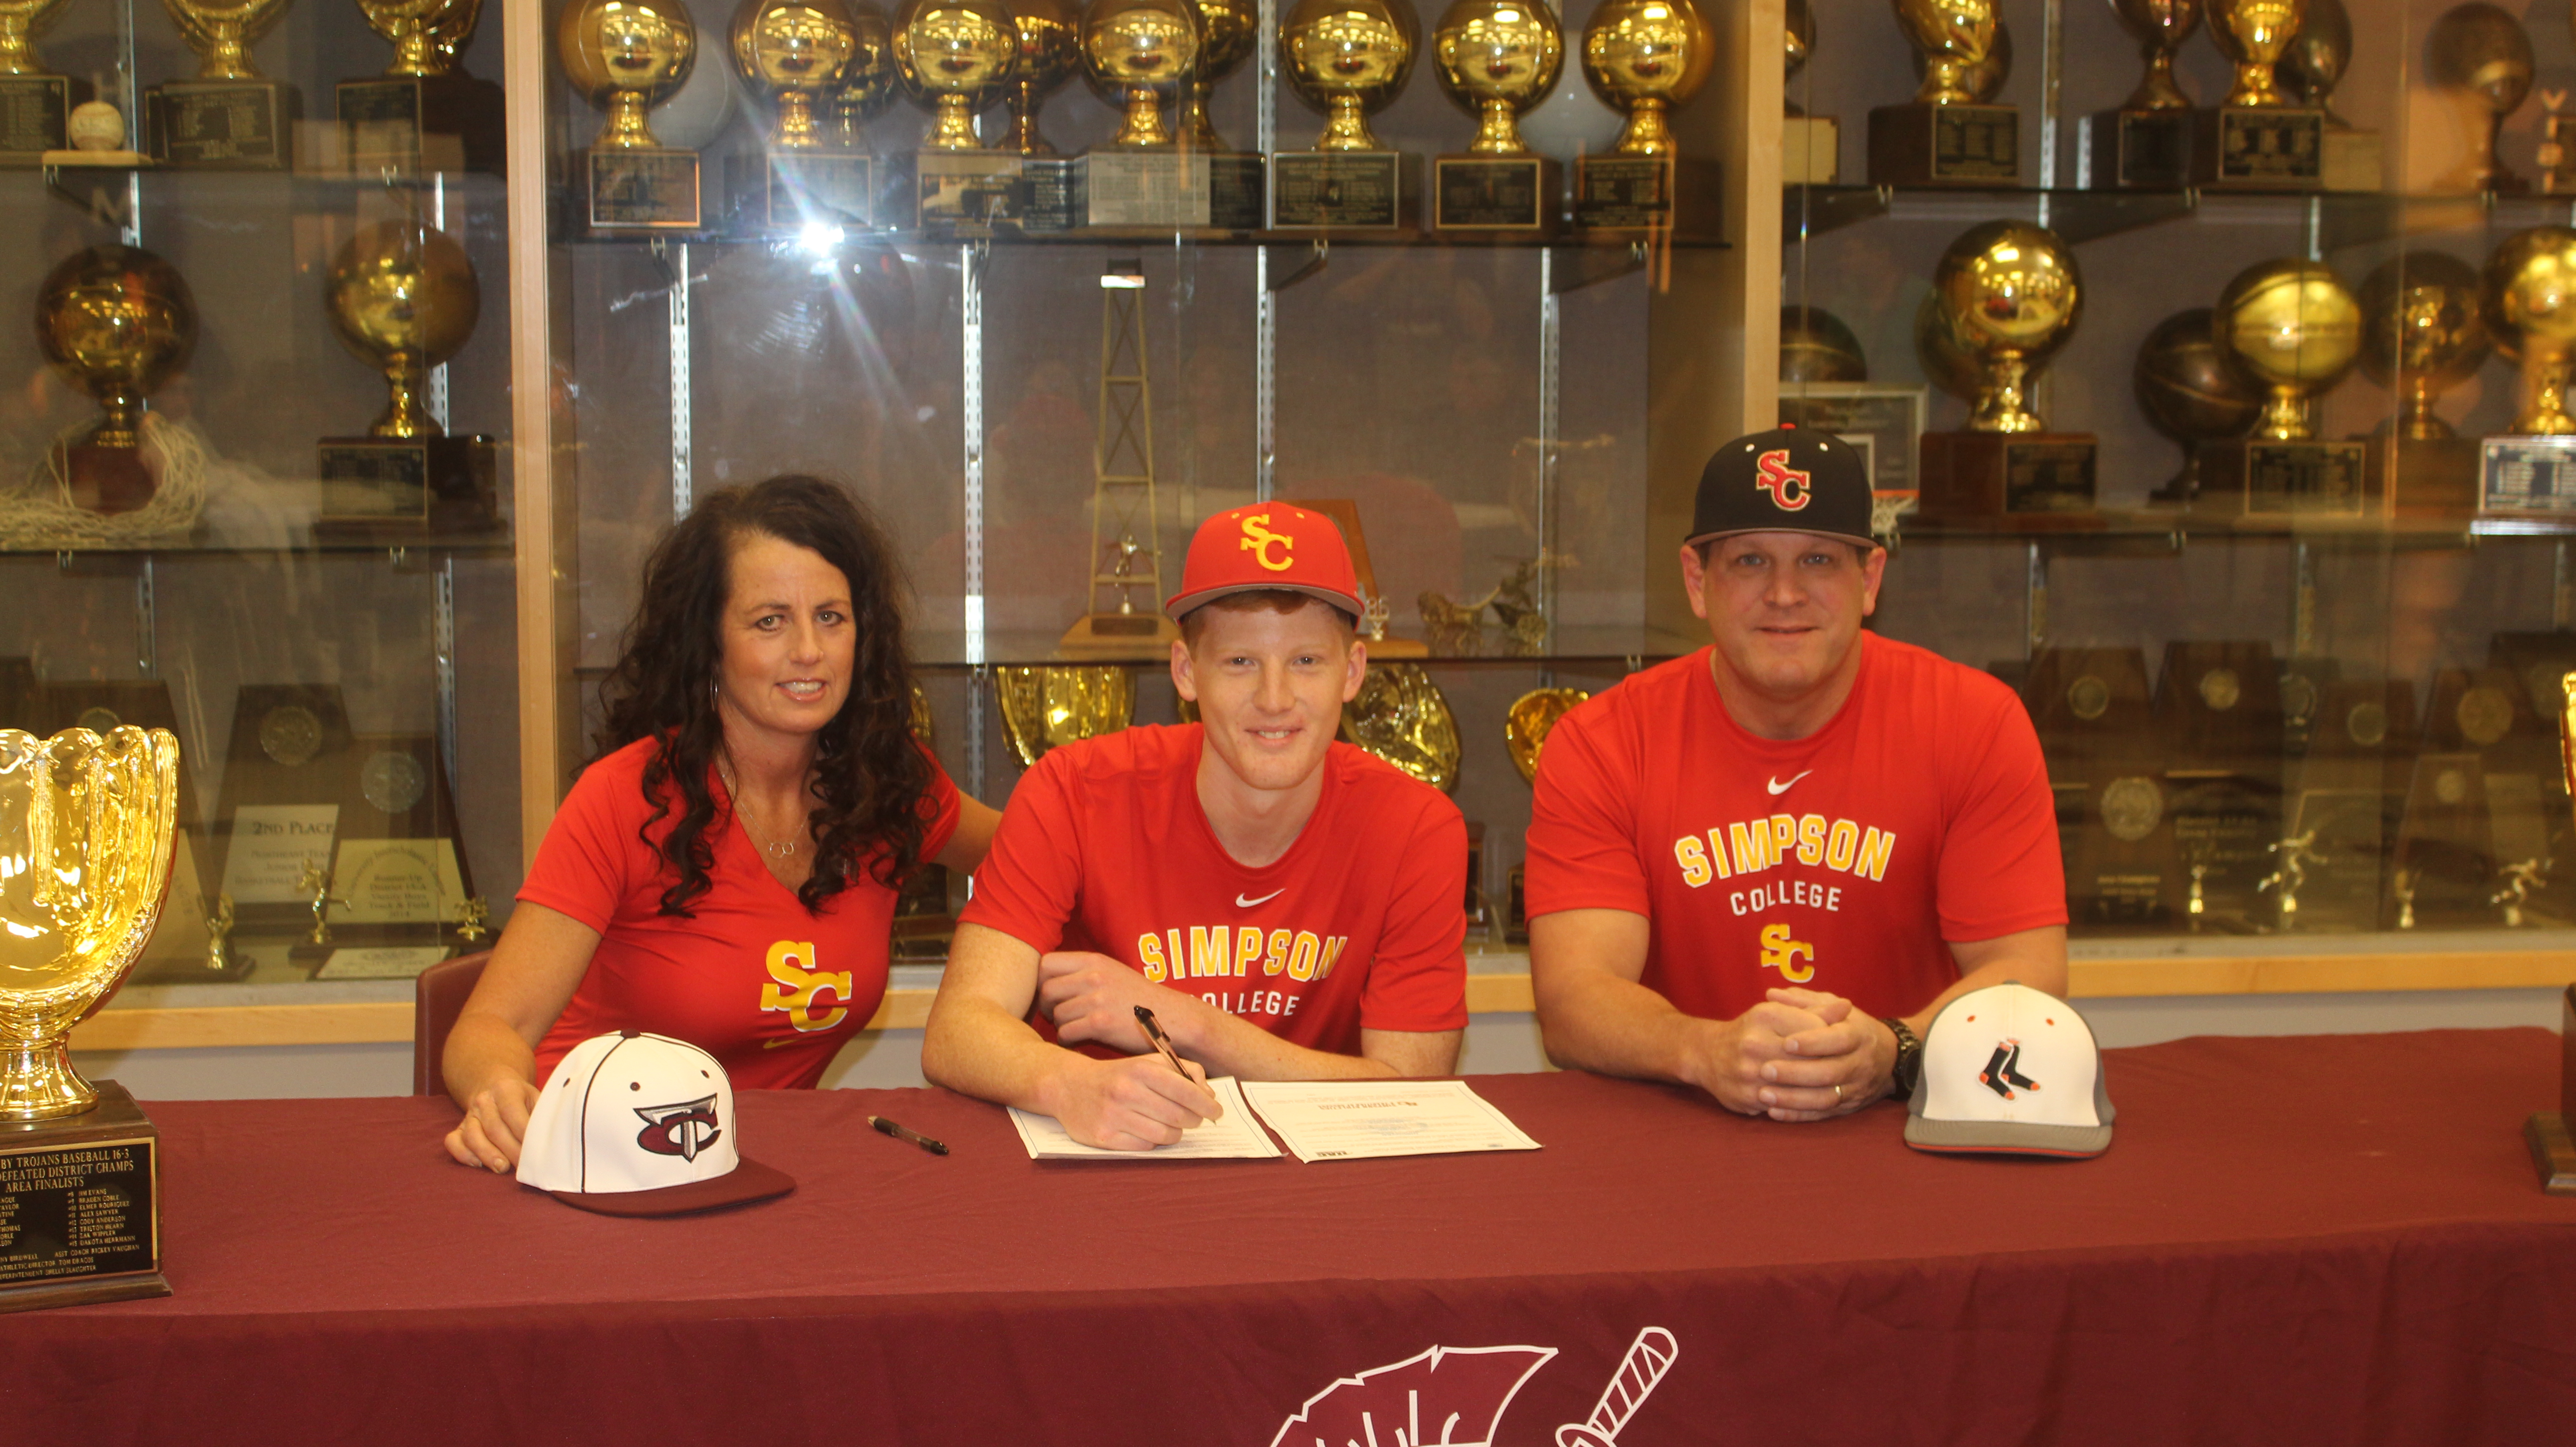 Cumby Baseball Player Ethan Coble Signs with Simpson College